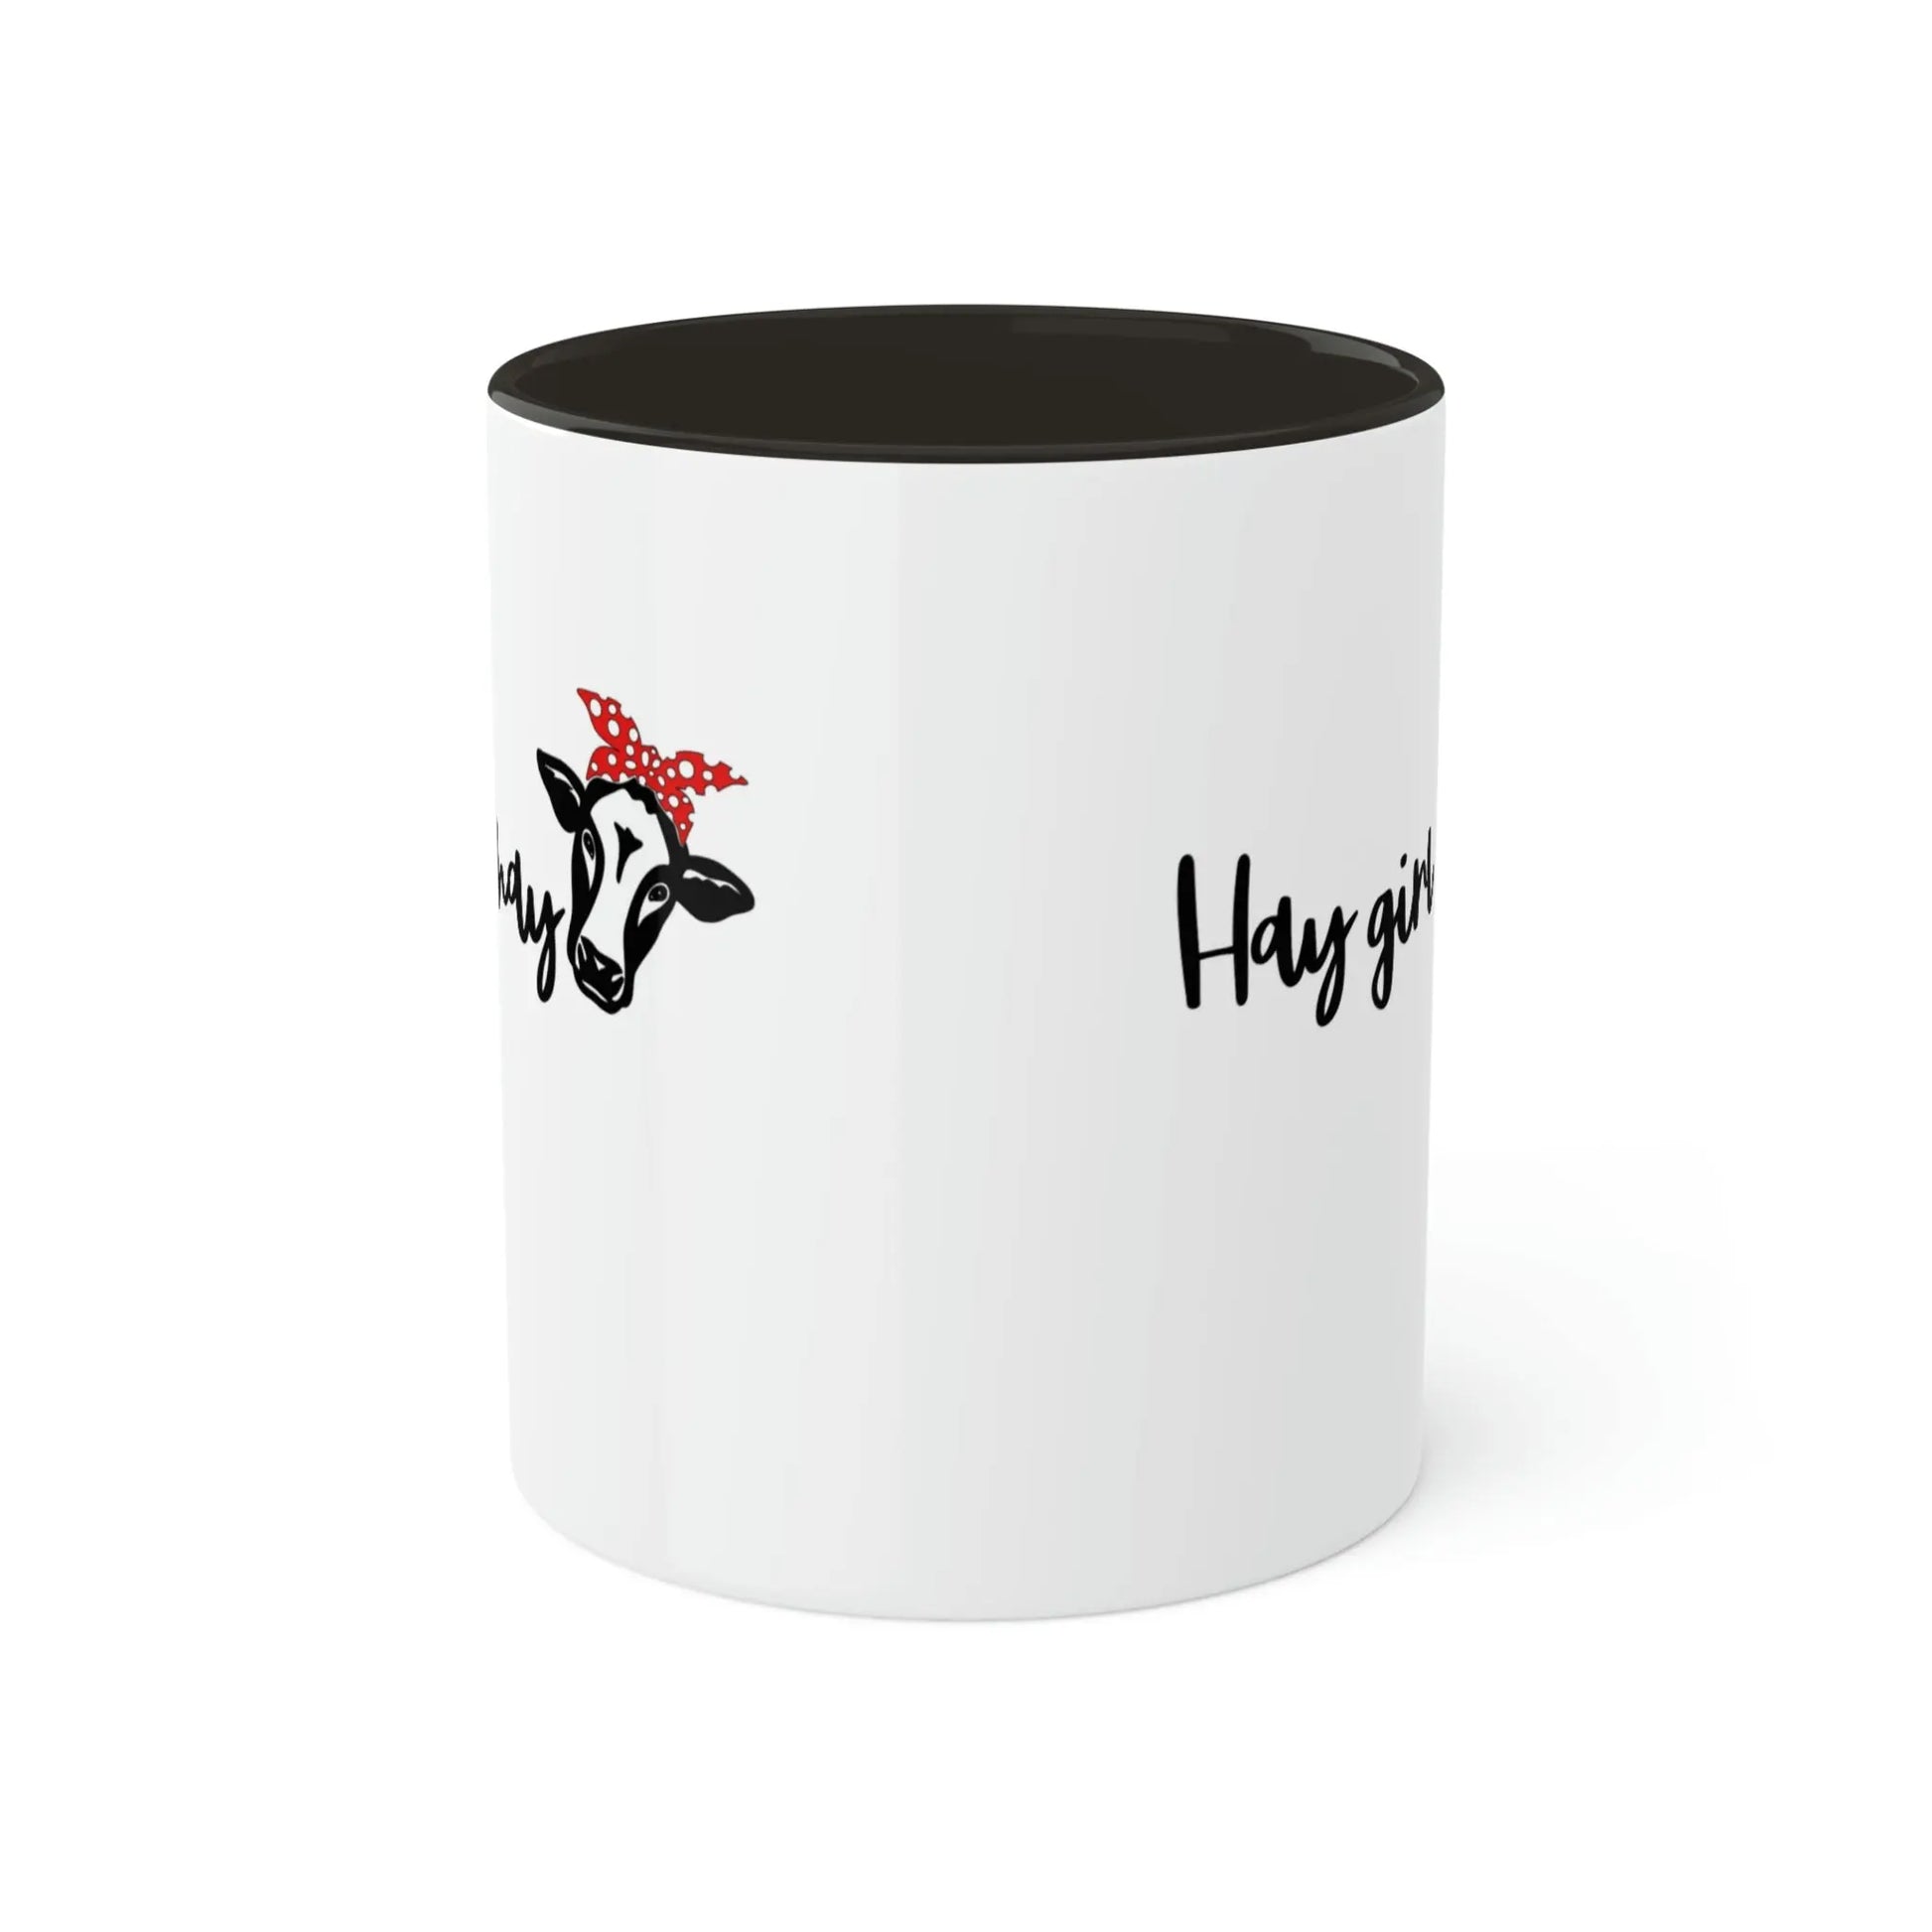 hay-girl-hay-glossy-mug-with-black-accent-11-oz-front-side